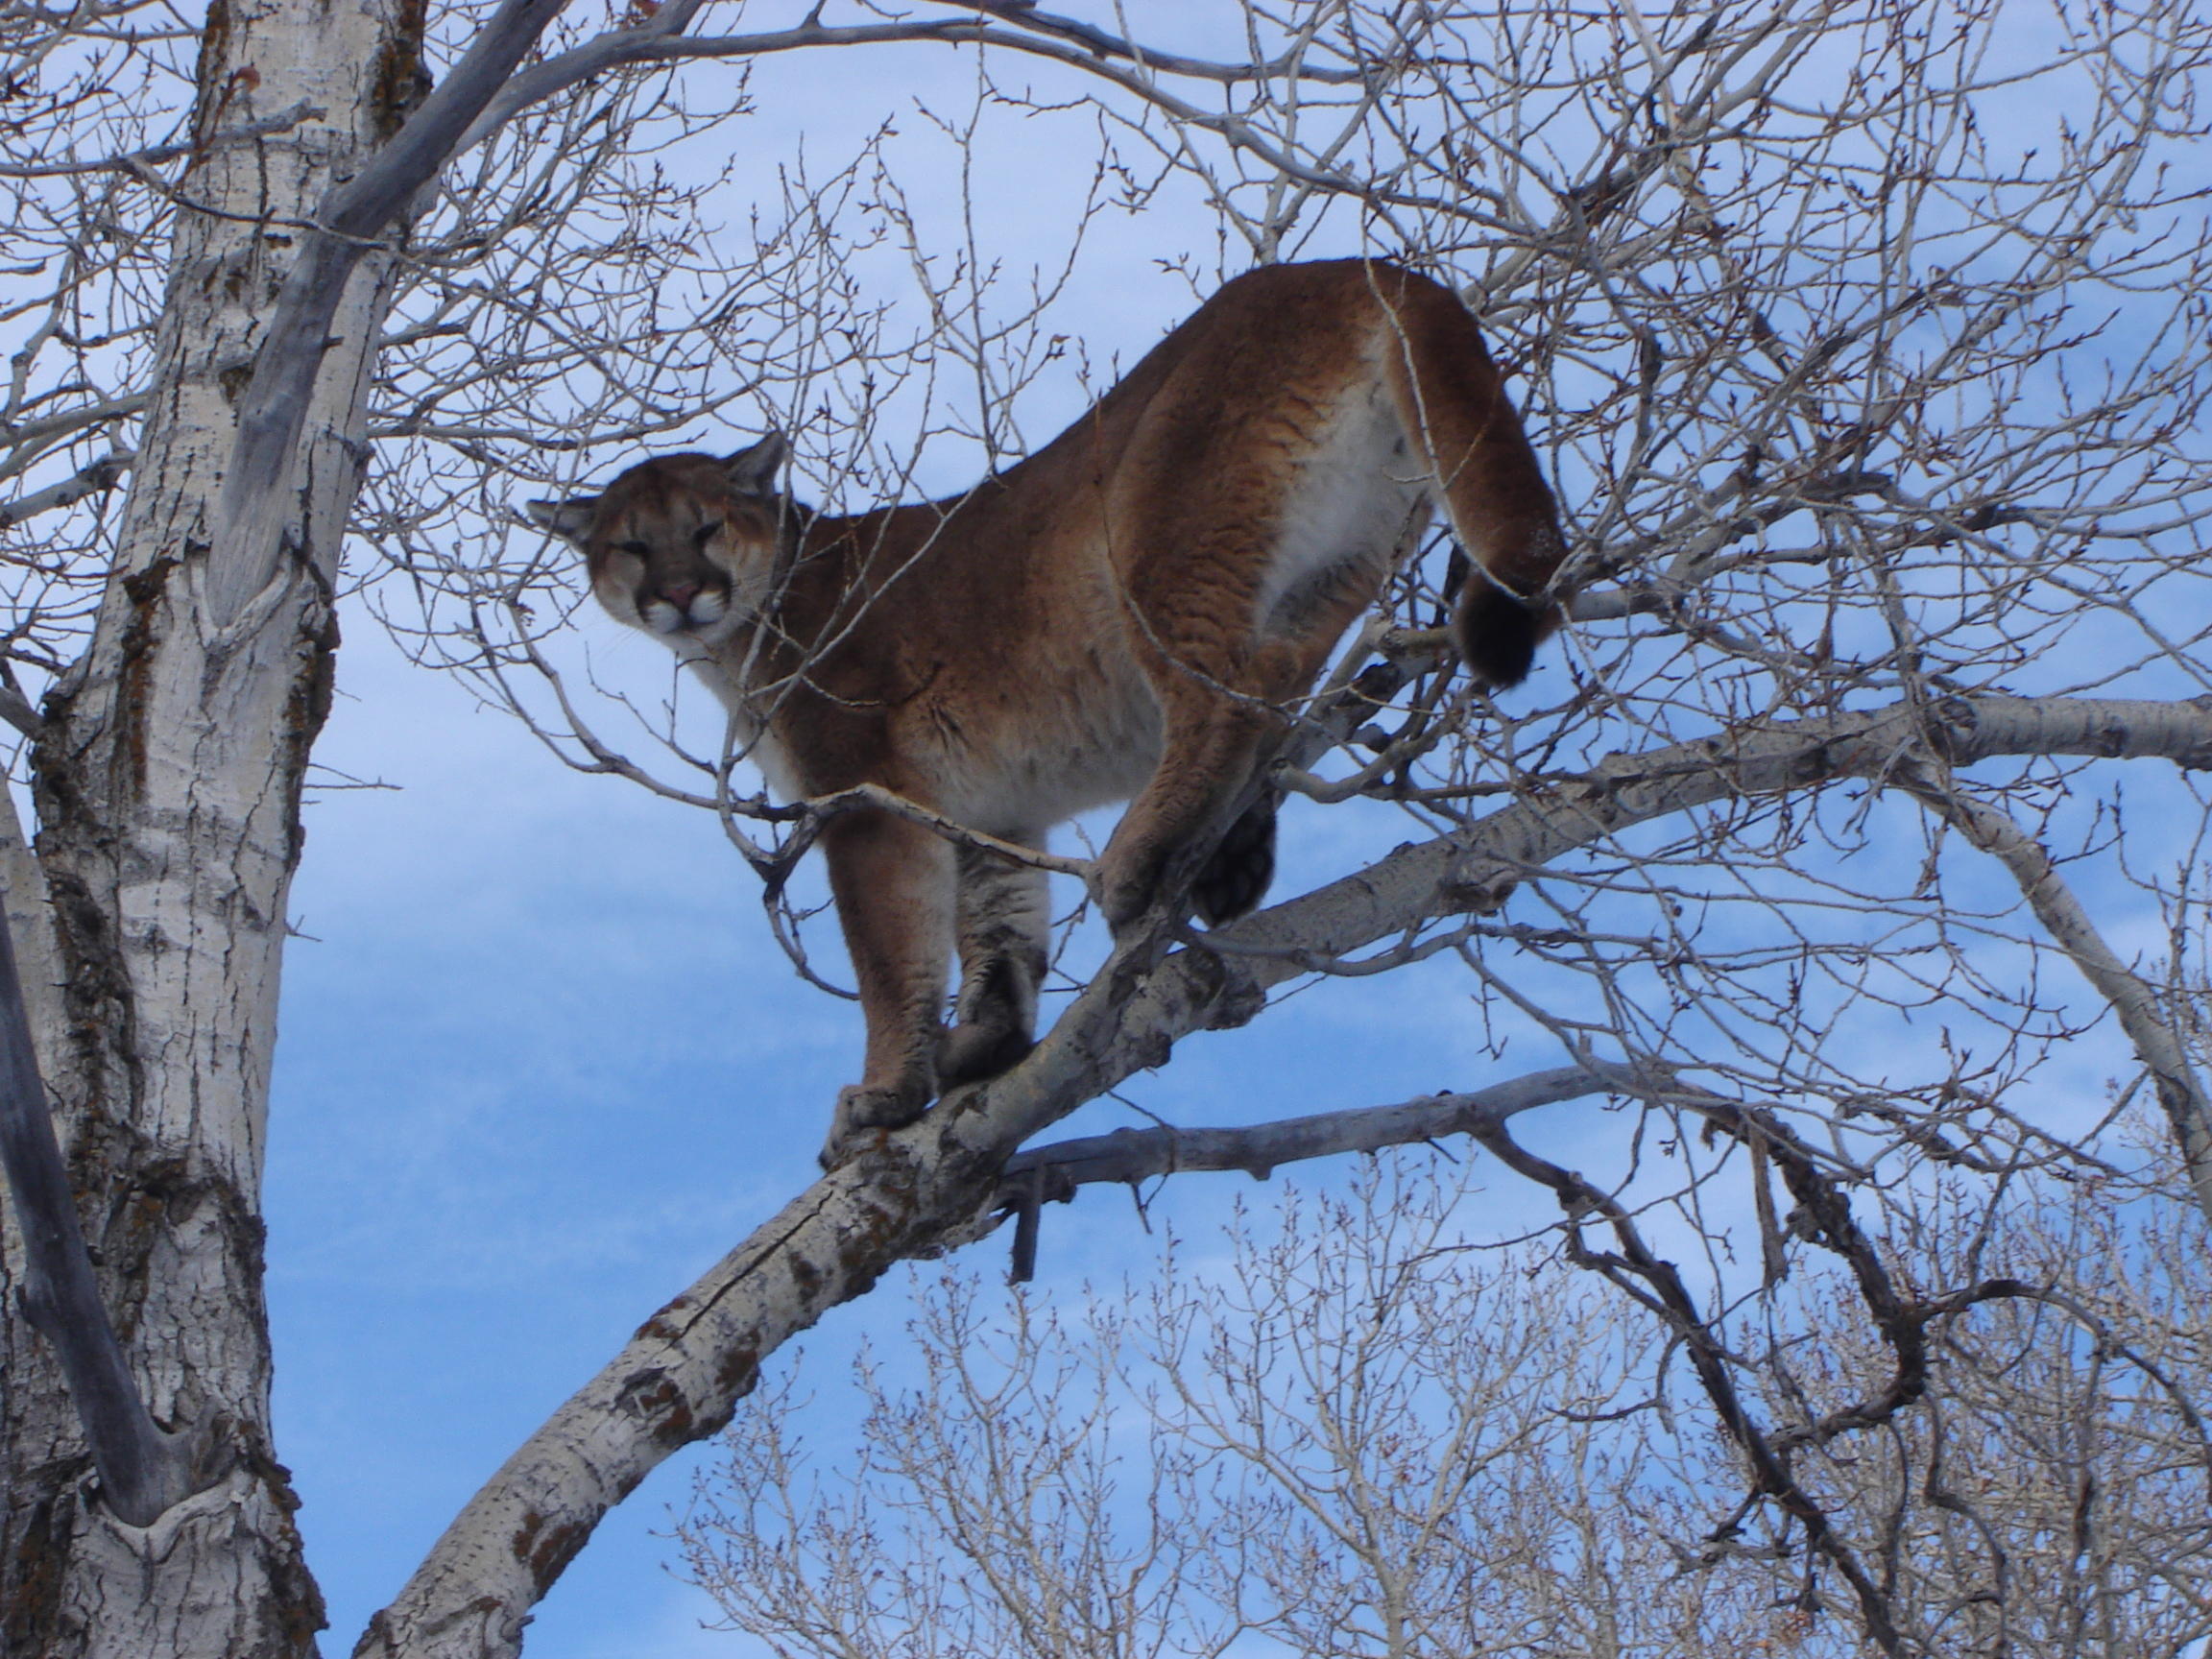 mountain lion cougar in a tree January 2008